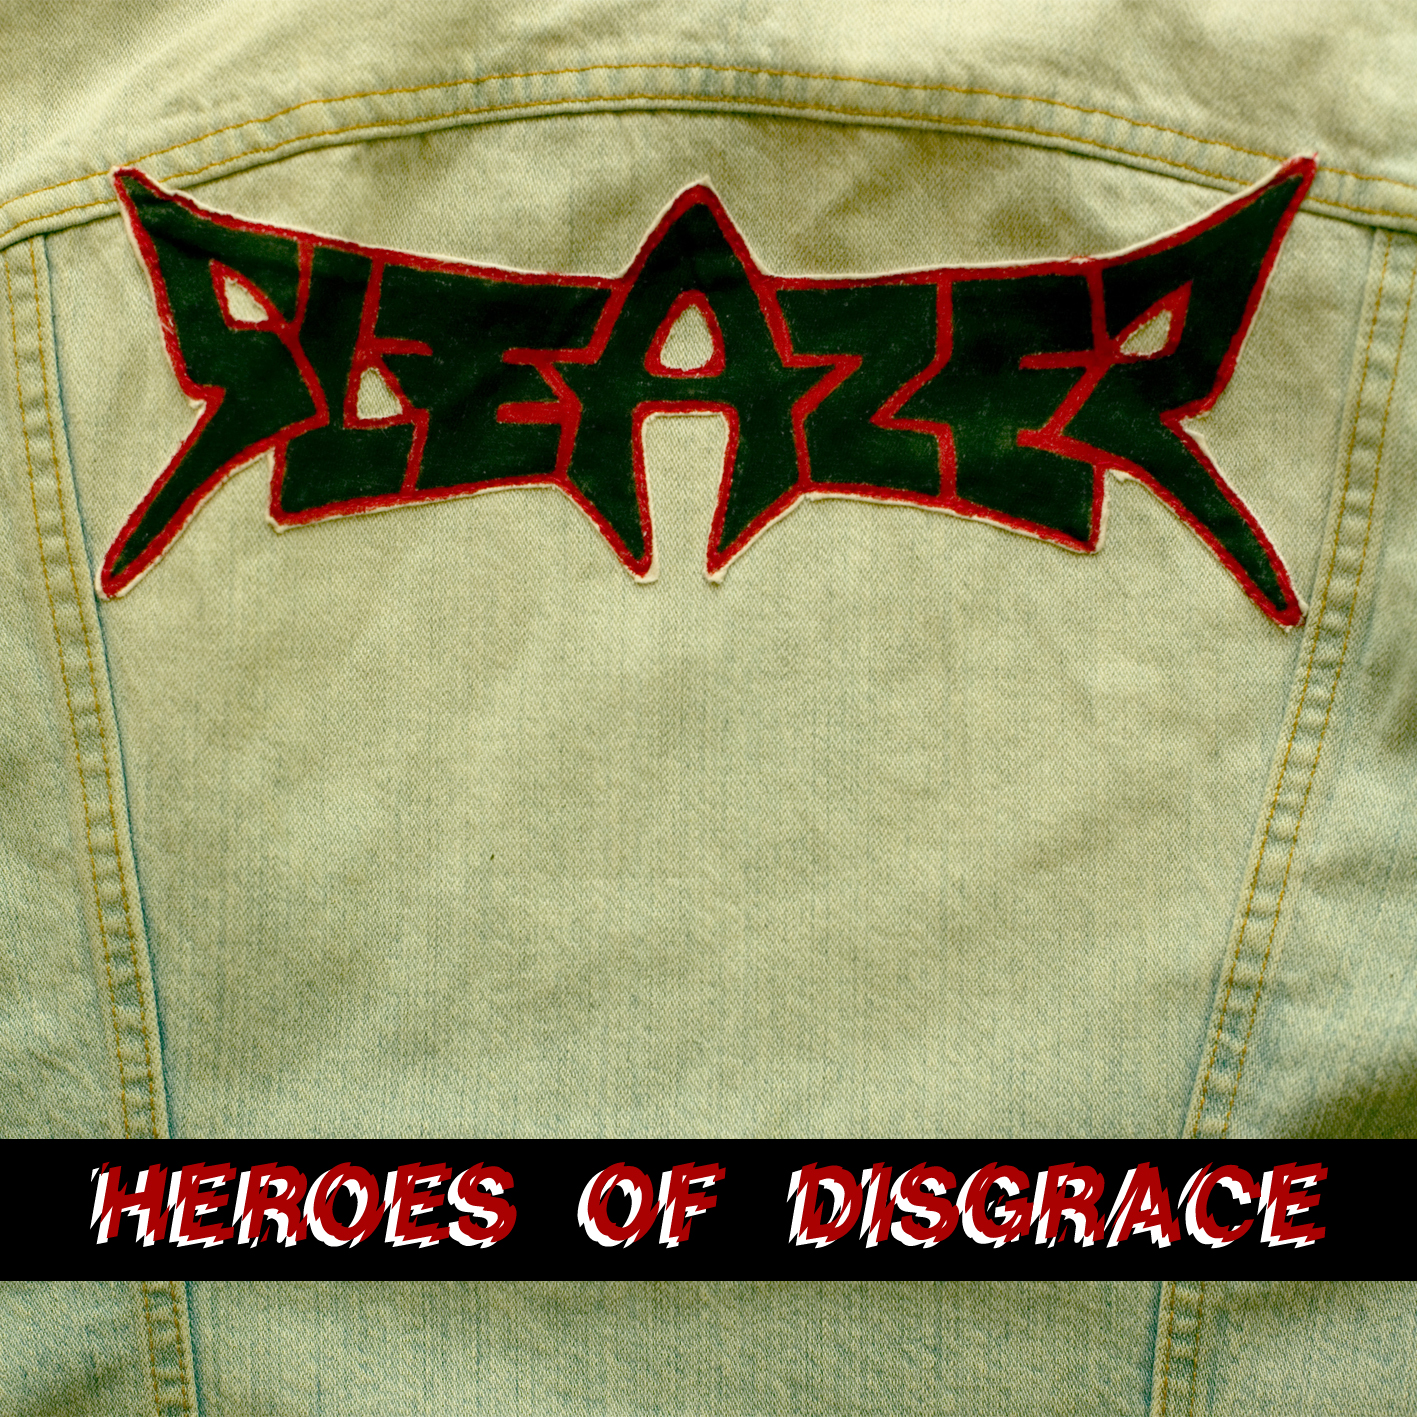 The Sleazer Heroes Of Disgrace